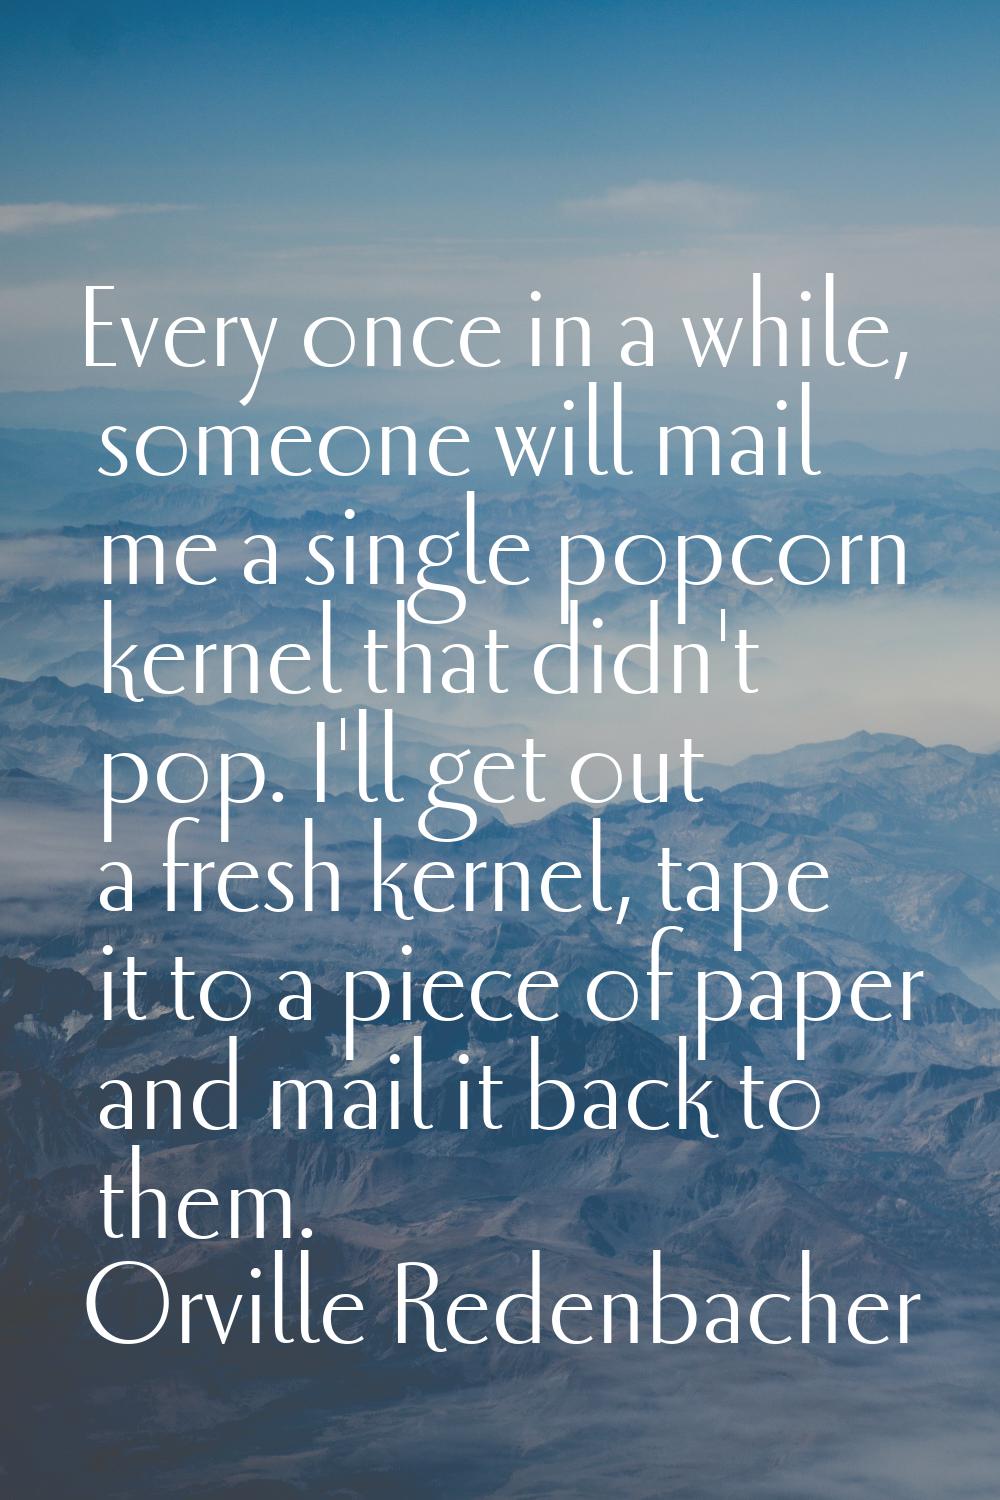 Every once in a while, someone will mail me a single popcorn kernel that didn't pop. I'll get out a